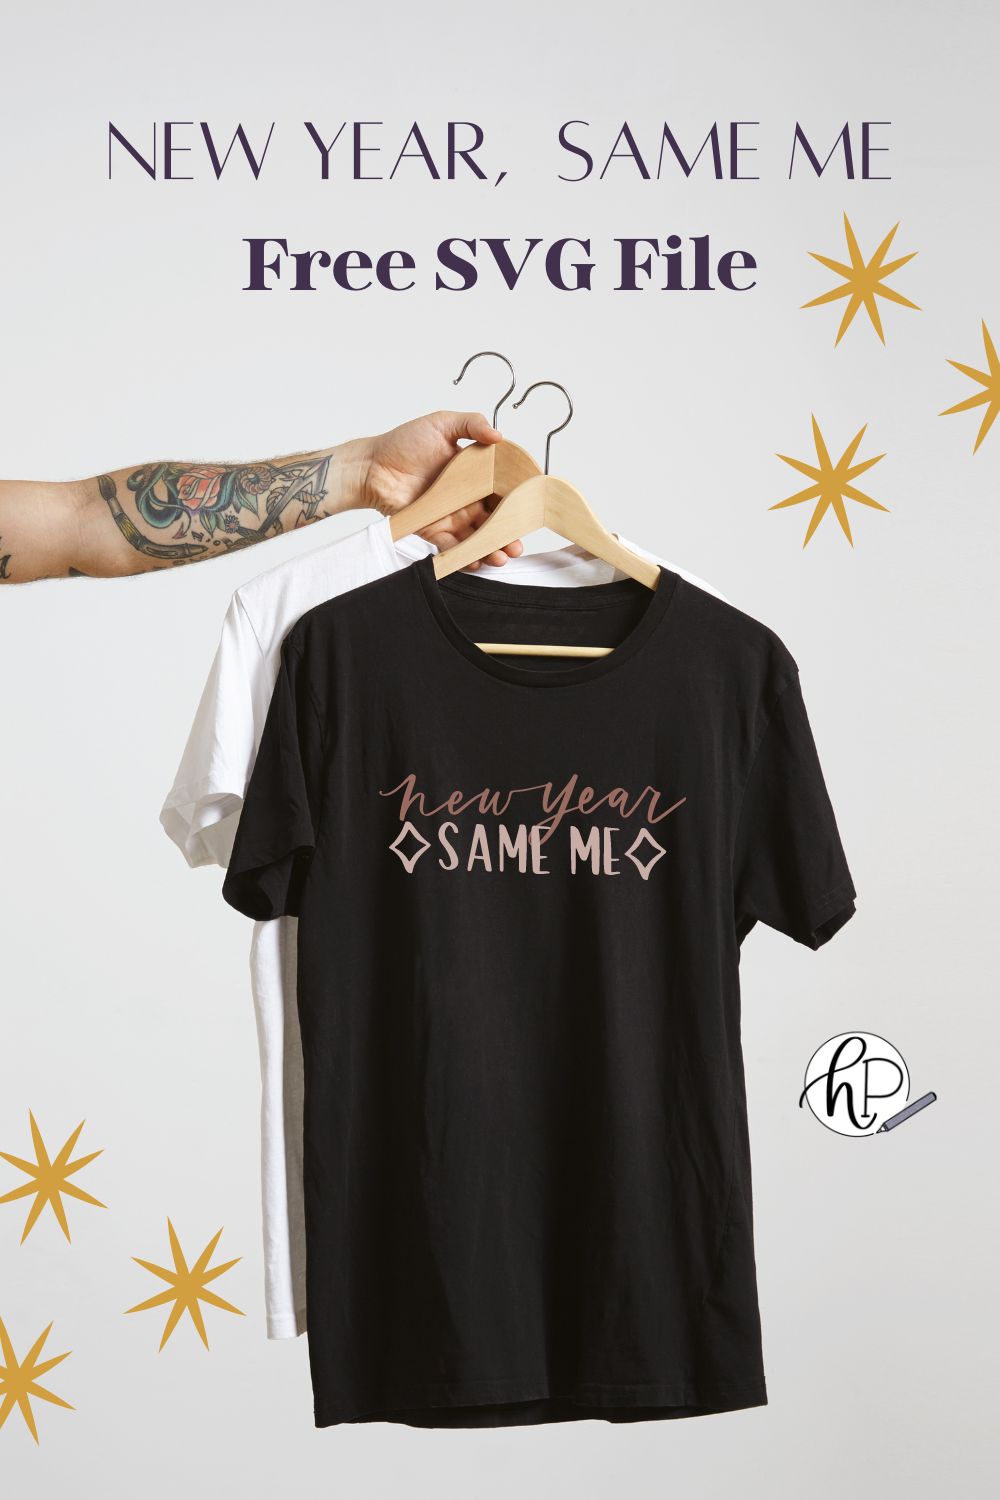 text: new year same me free svg file image of svg design on black t-shirt being held by hand on hanger with stars in background